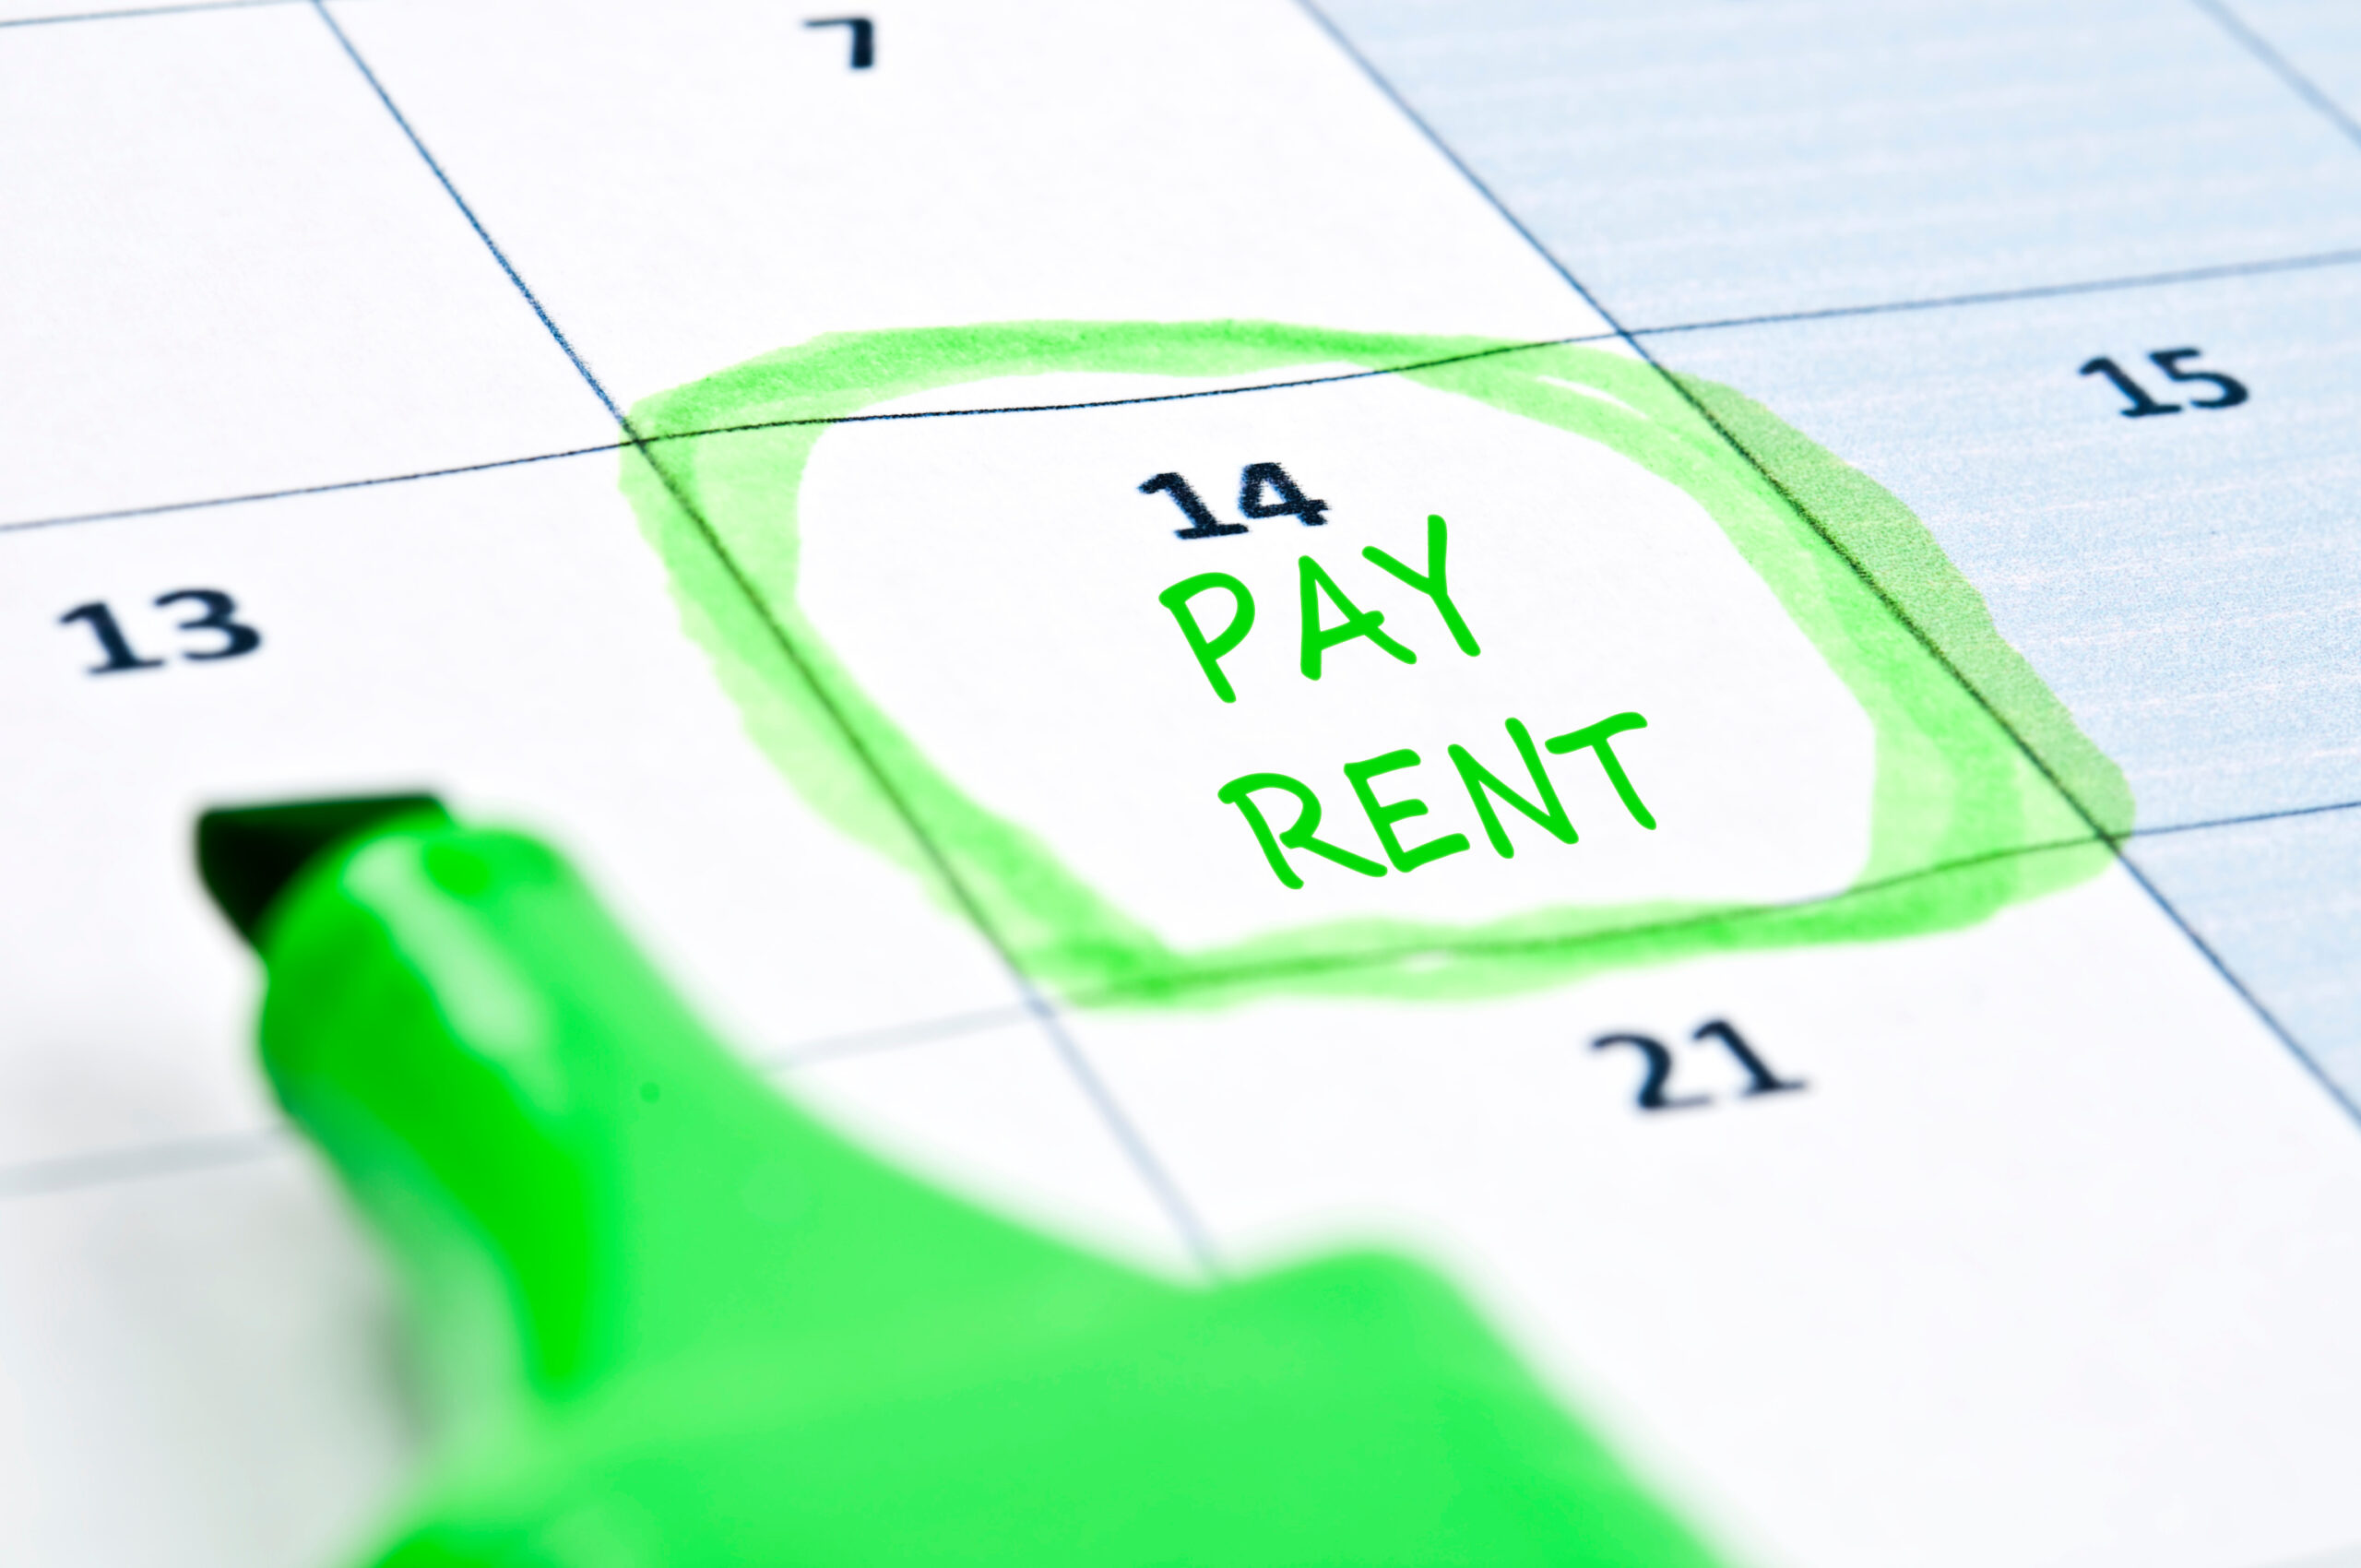 calendar with "pay rent" marked and circled